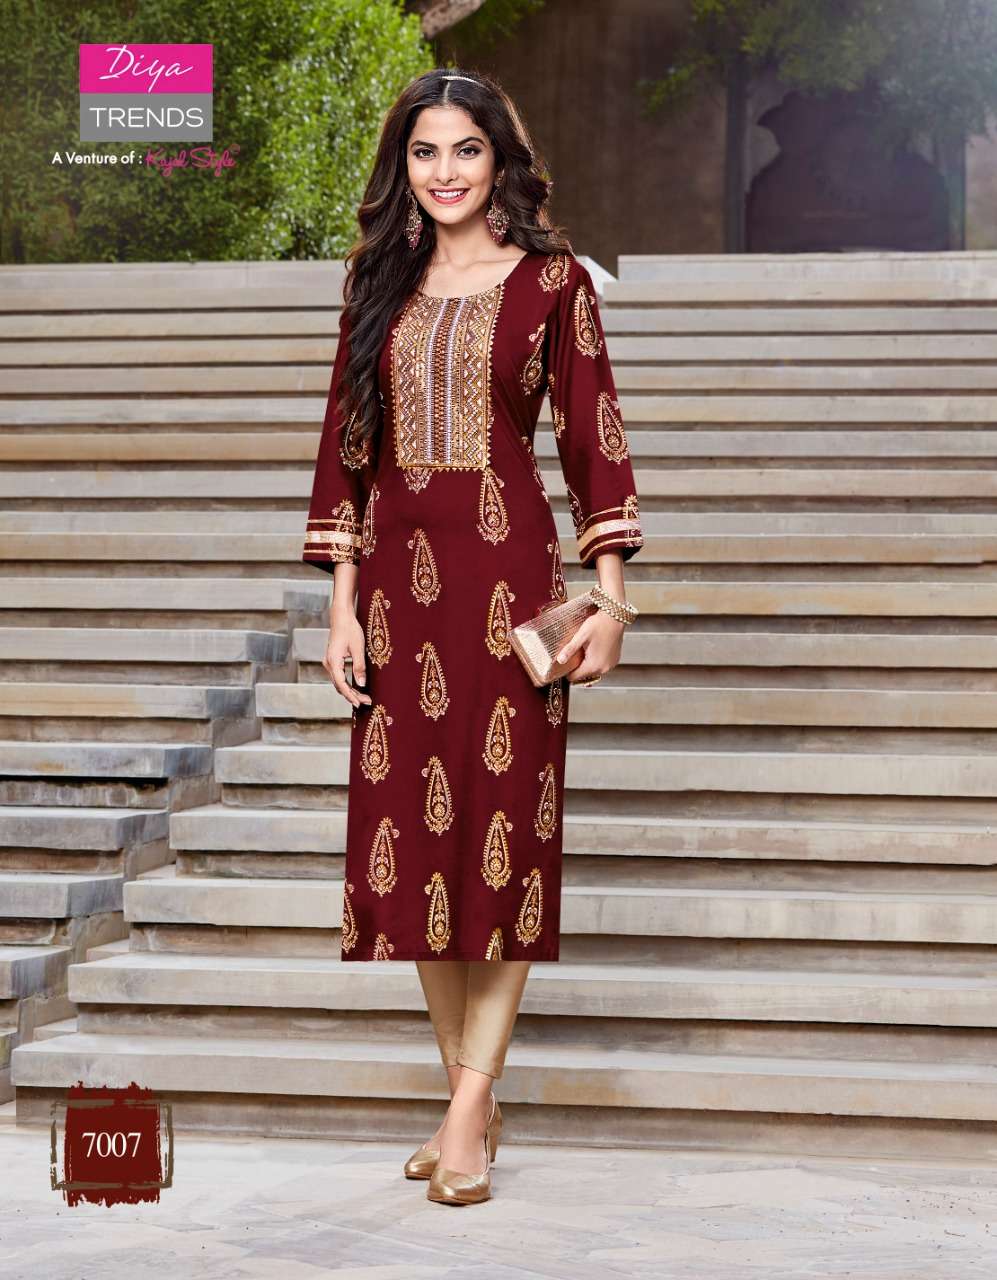 Victoria Vol-7 By Diya Trends 7001 To 7014 Series Designer Stylish Fancy Colorful Beautiful Party Wear & Ethnic Wear Collection Rayon Print With Embroidered Kurtis At Wholesale Price